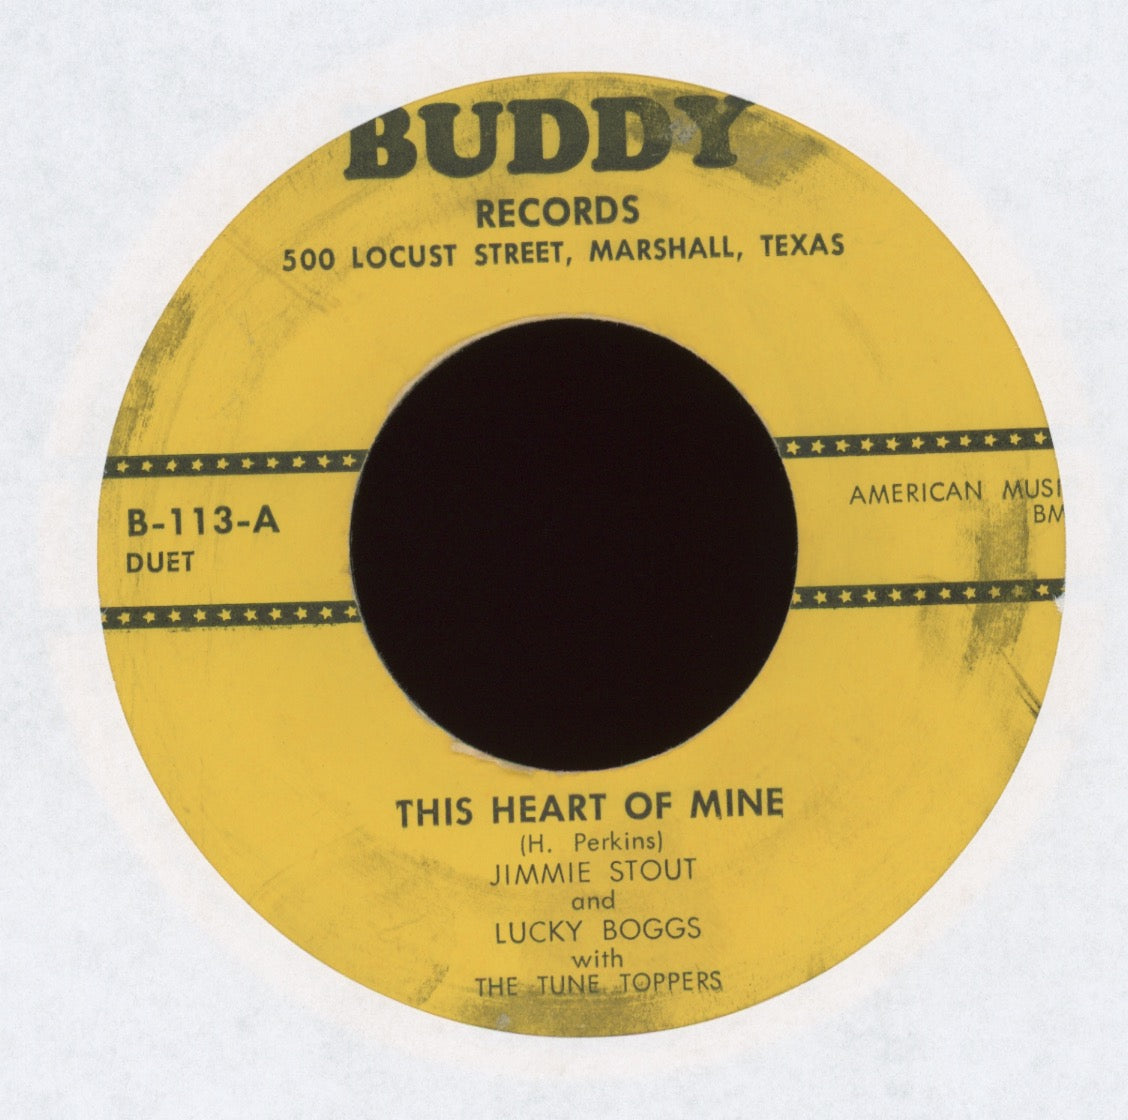 Jimmie Stout - This Heart Of Mine on Buddy